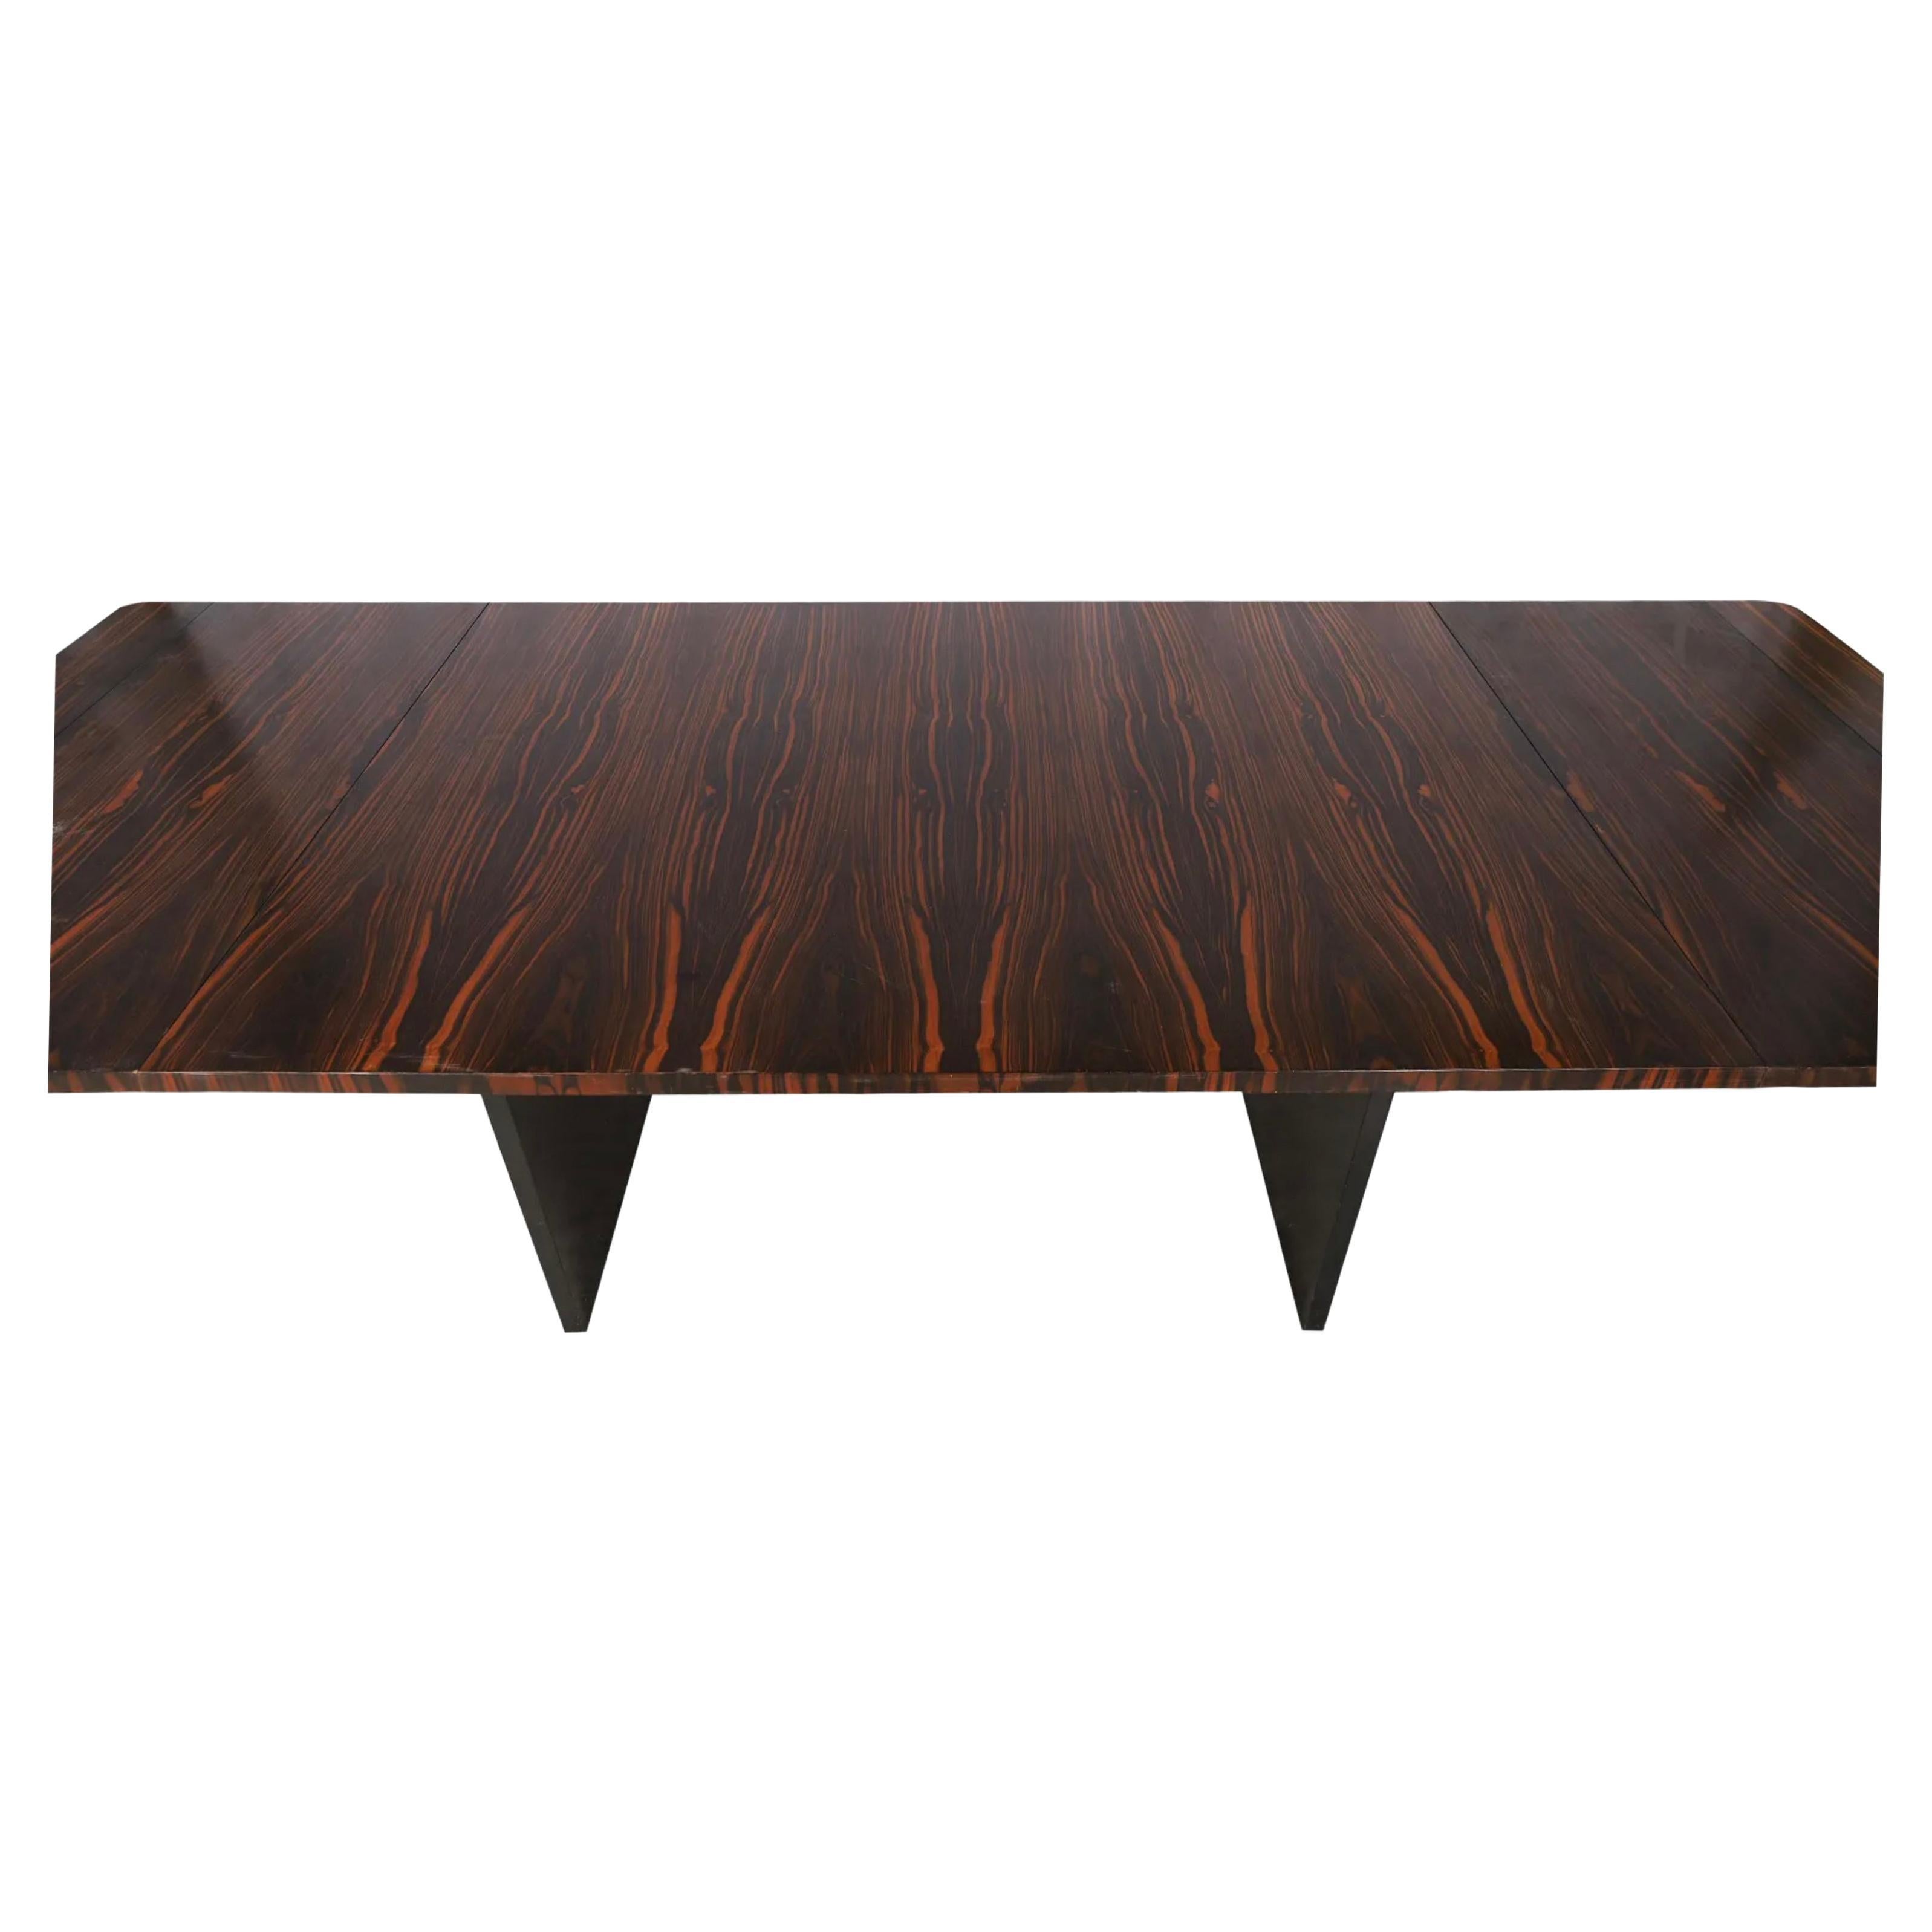 Stunning midcentury Brazilian rosewood Rectangle Modern extension dining table with (2) leaves. This table has Black wood legs with chrome stretcher. This table is in beautiful condition with black, dark brown and reddish rosewood tones very great